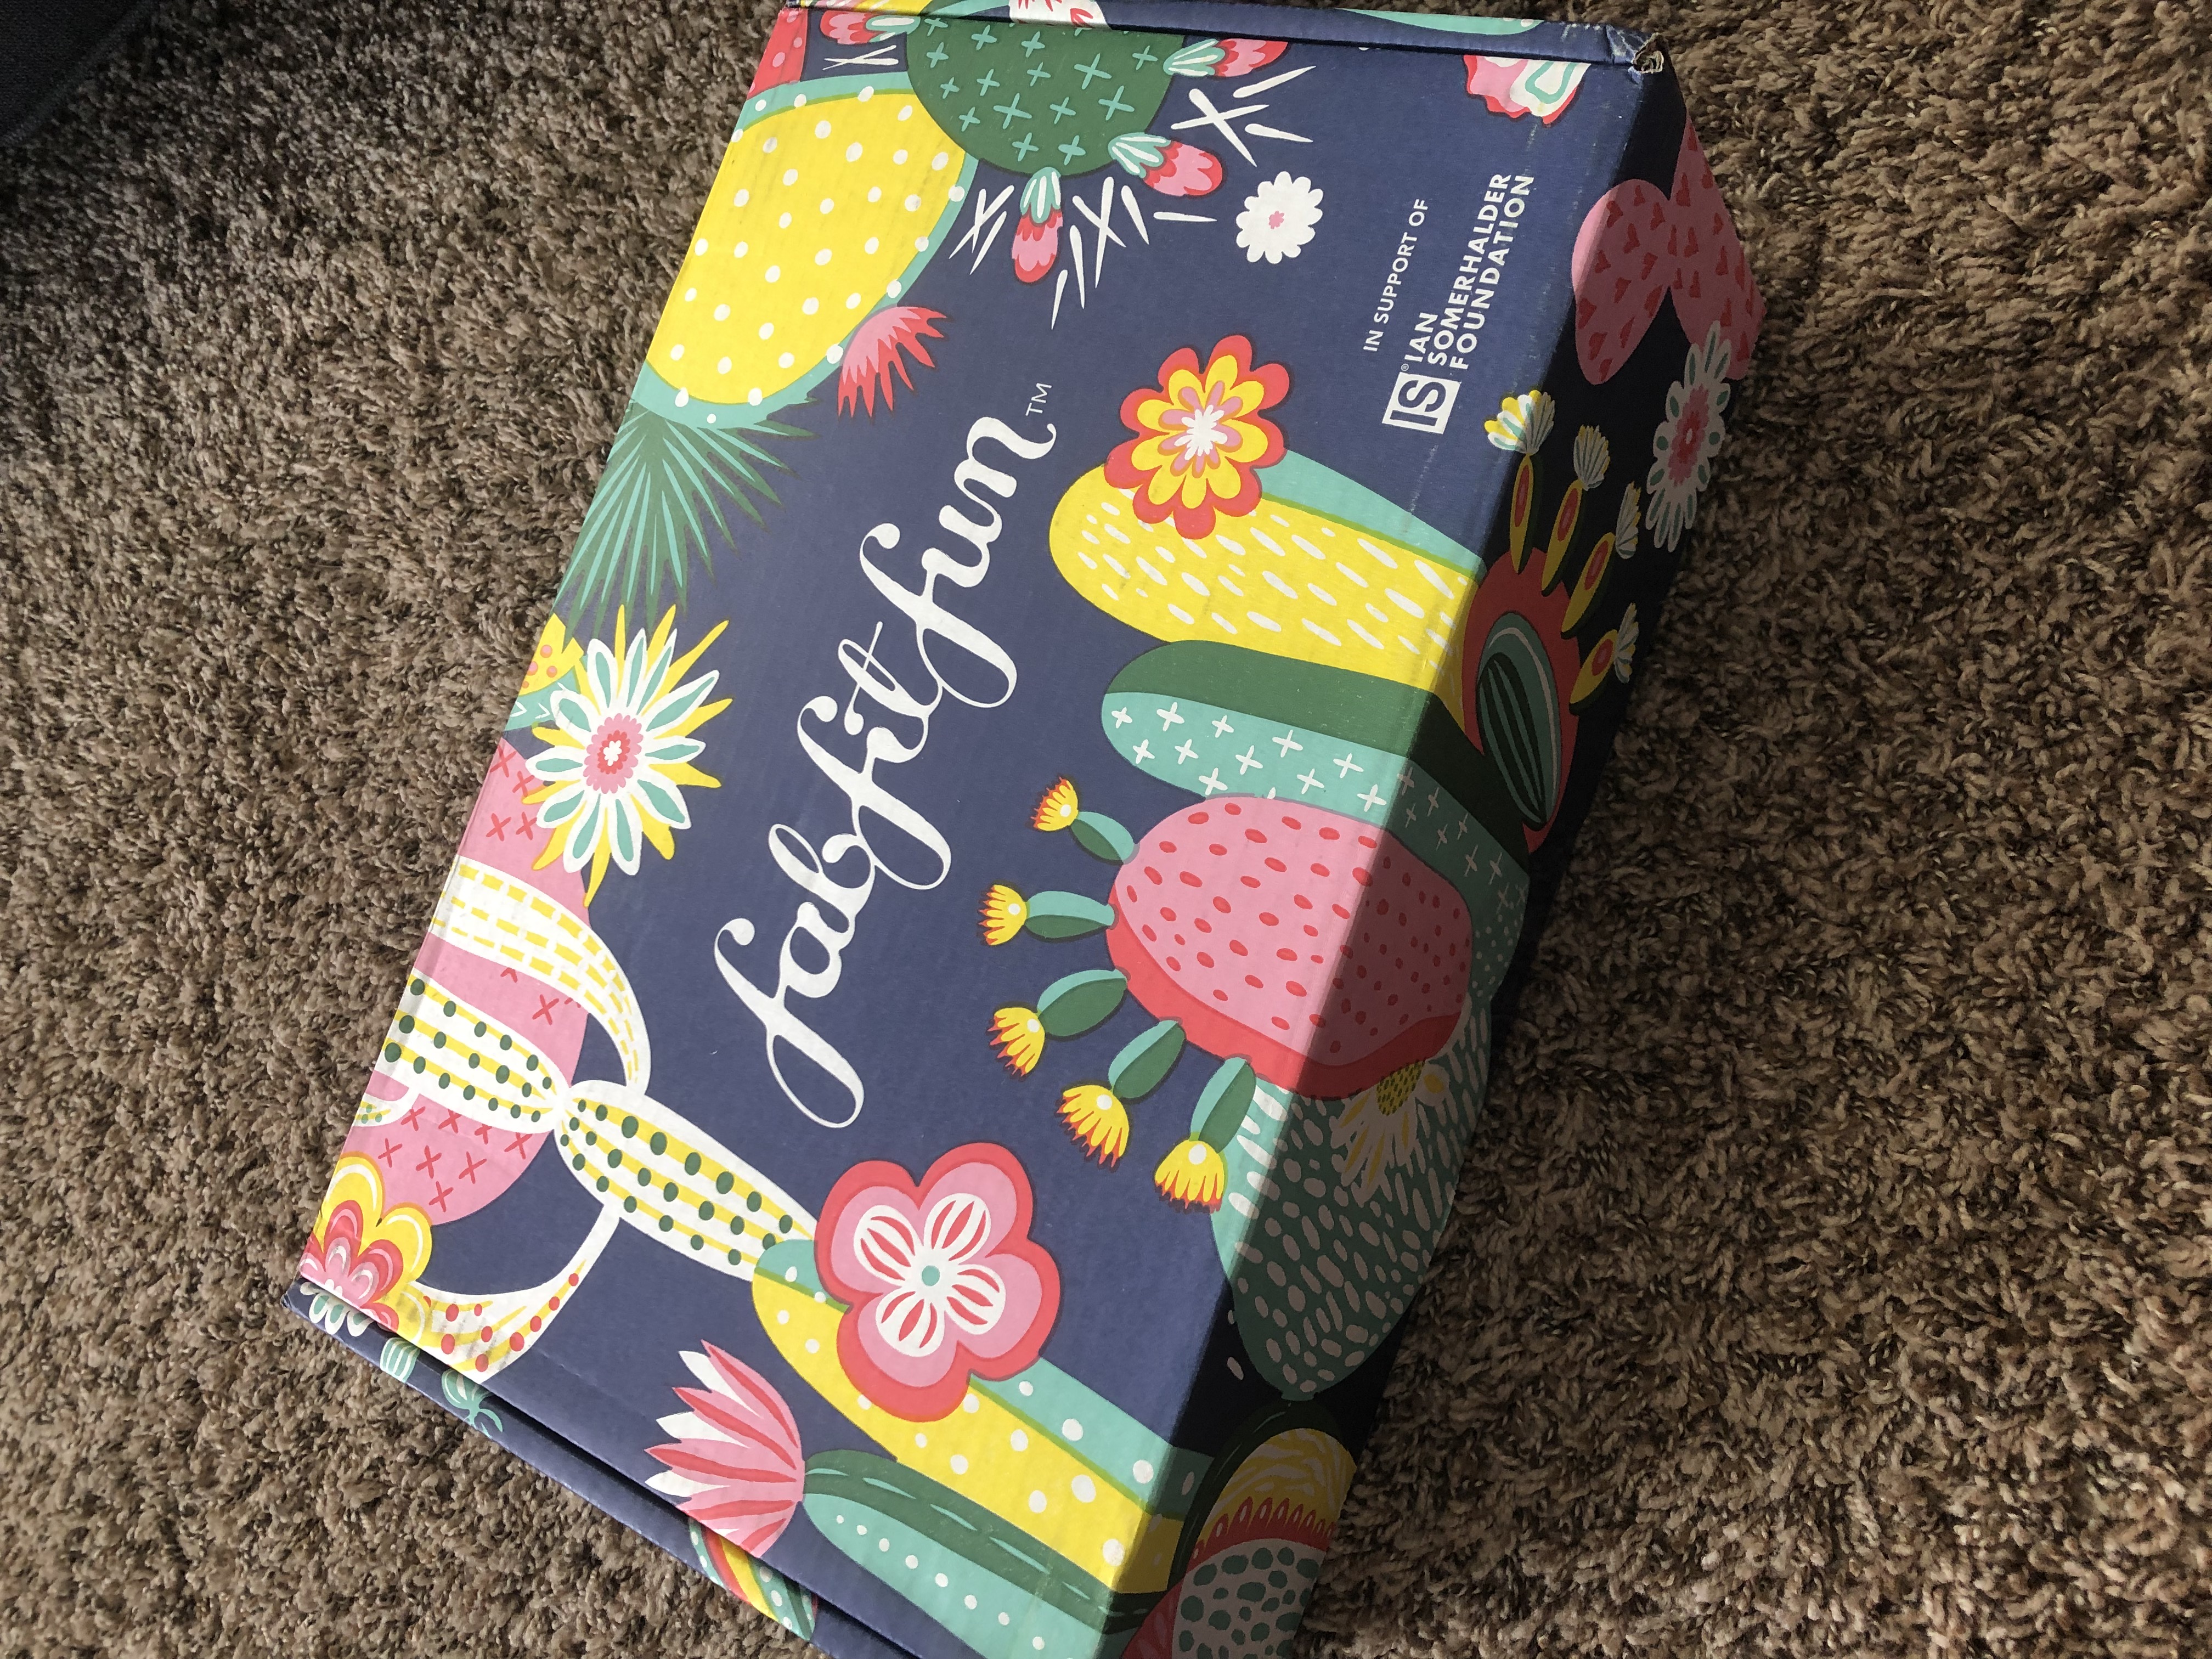 IS THE FABFITFUN BOX WORTH IT? SPRING 2019 REVIEW - The Katherine Chronicles